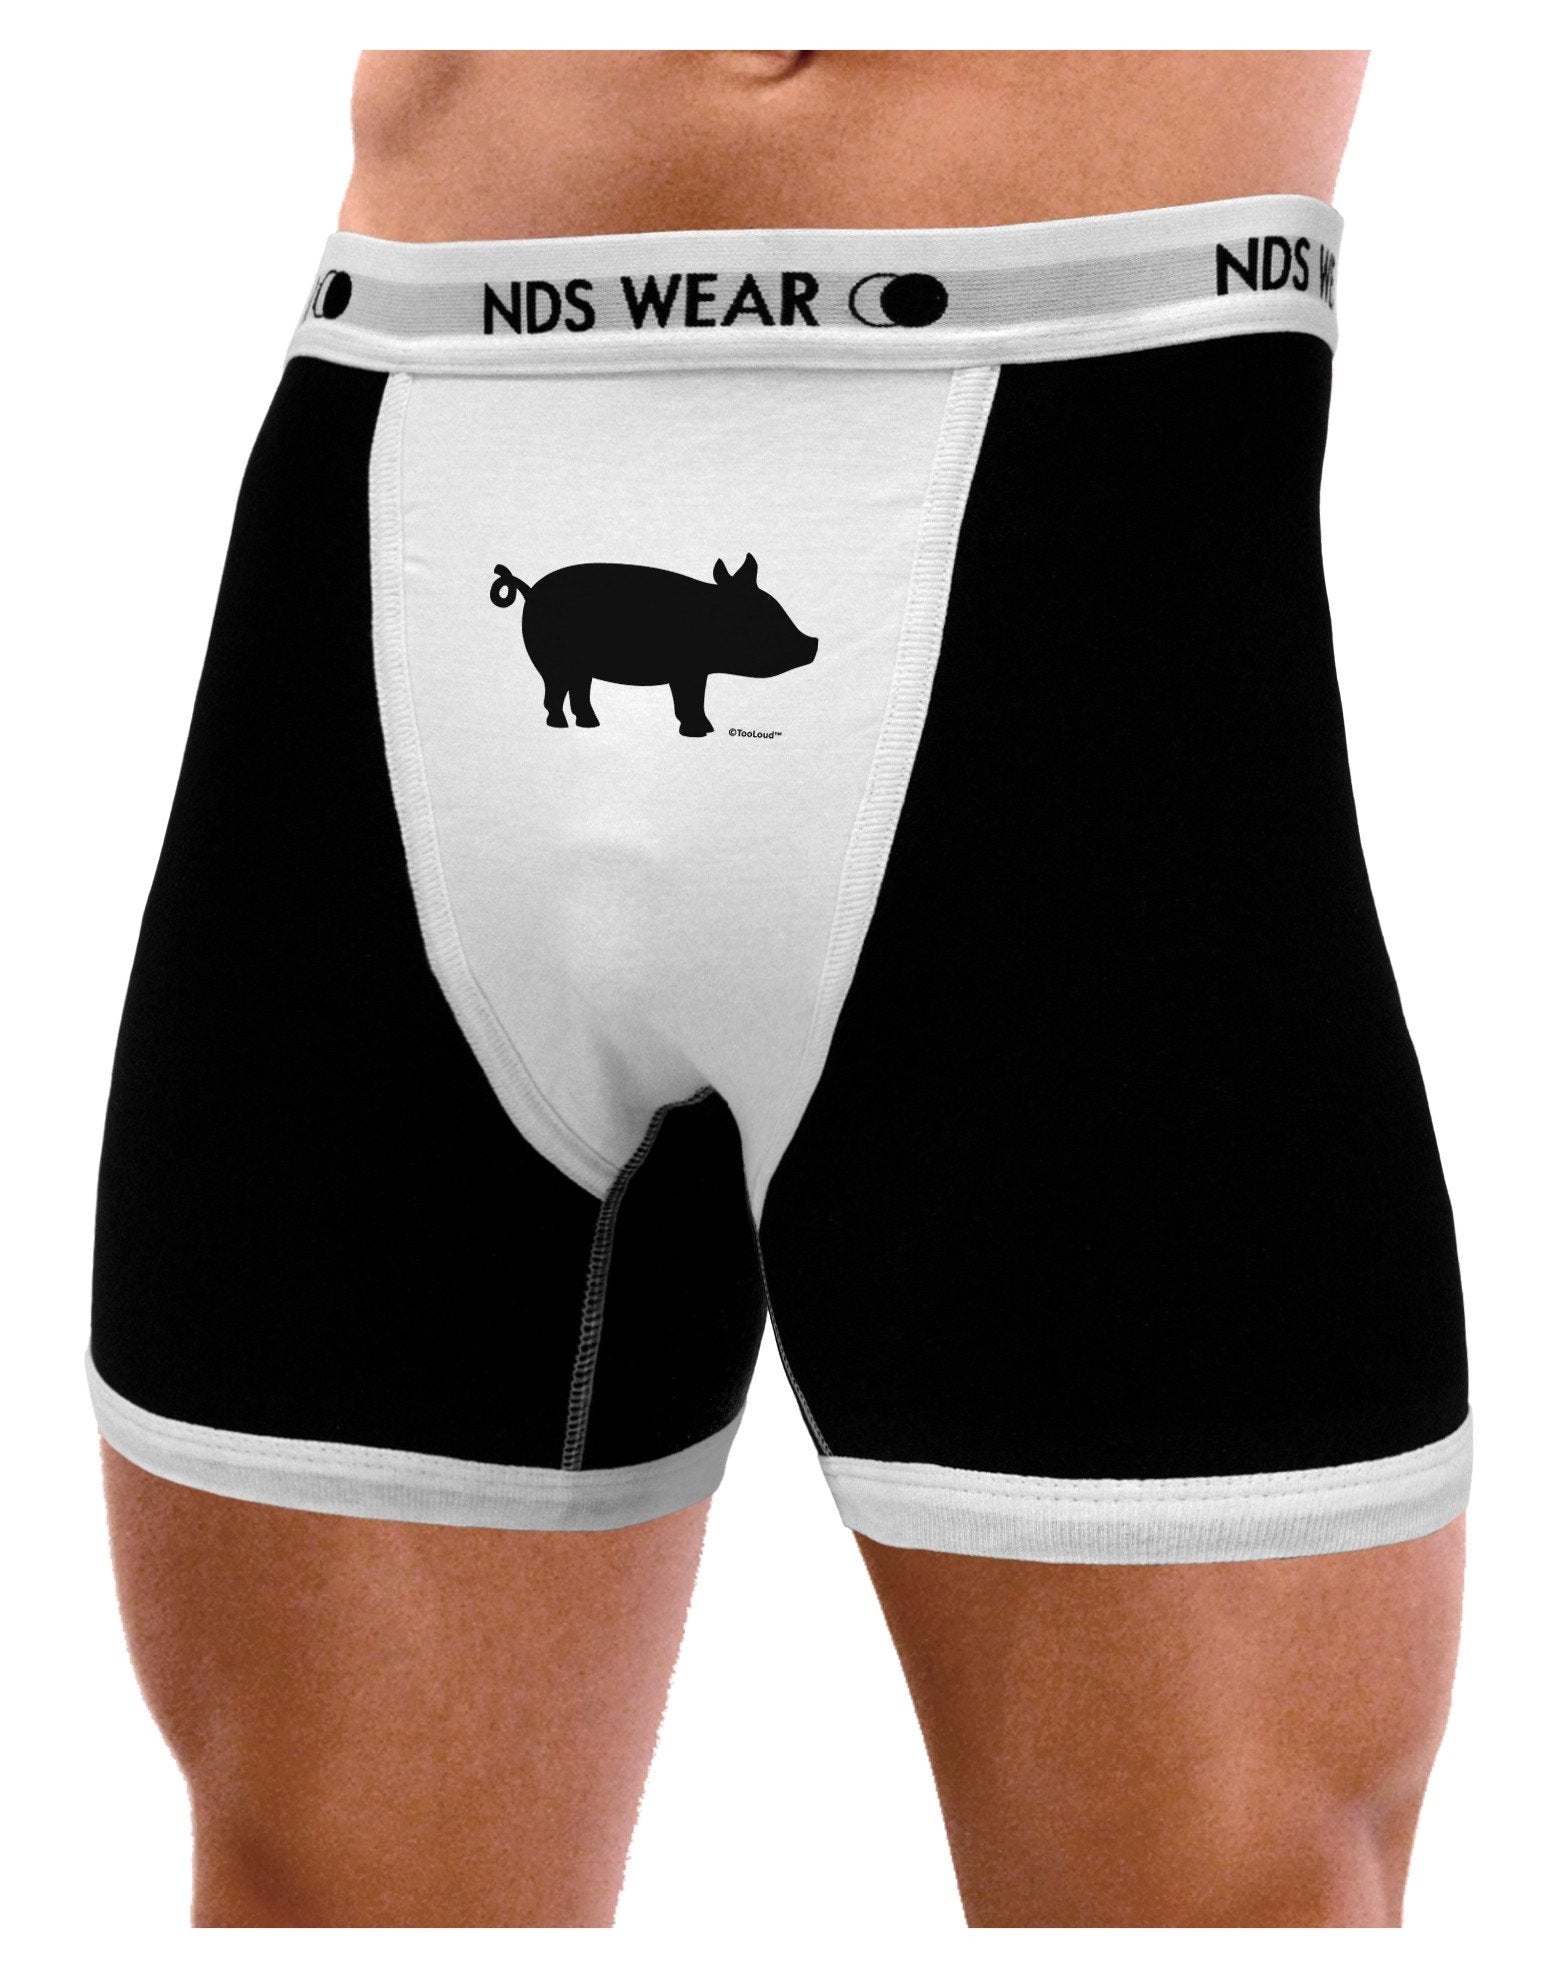 Pig Silhouette Design Mens Boxer Brief Underwear by TooLoud - NDS WEAR